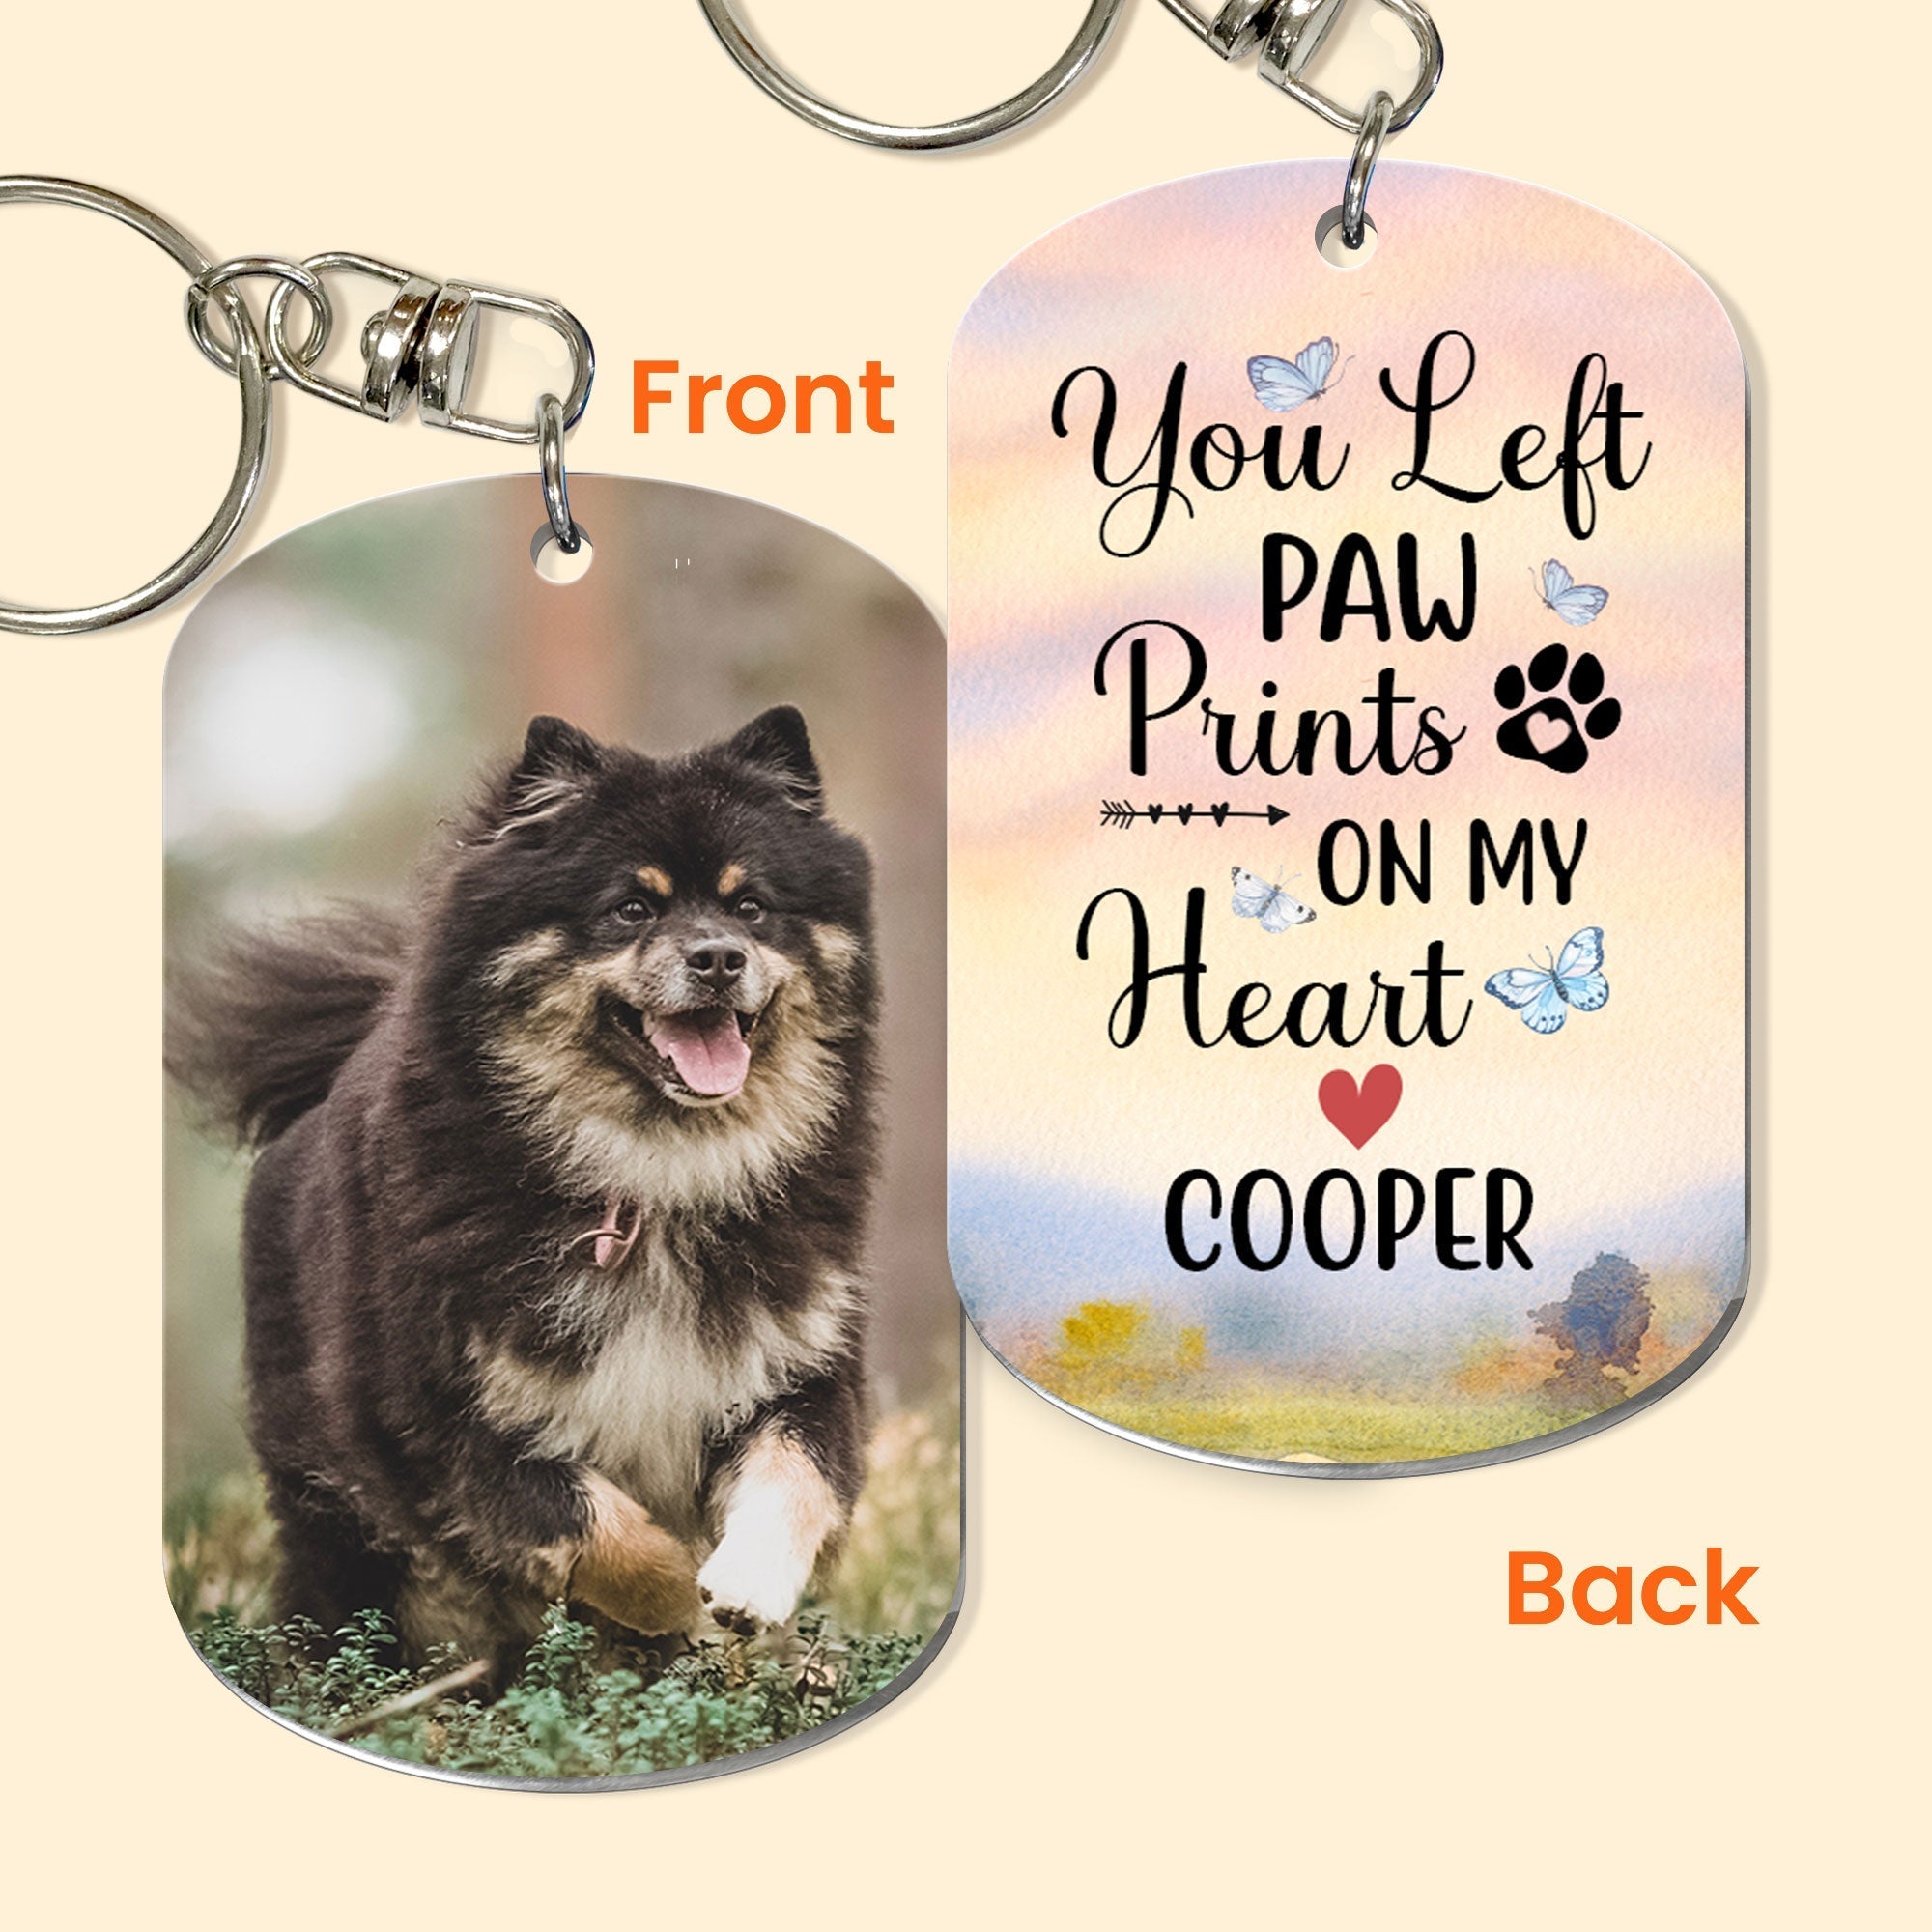 You Left Paw Prints On My Heart - Personalized Photo Stainless Steel Keychain